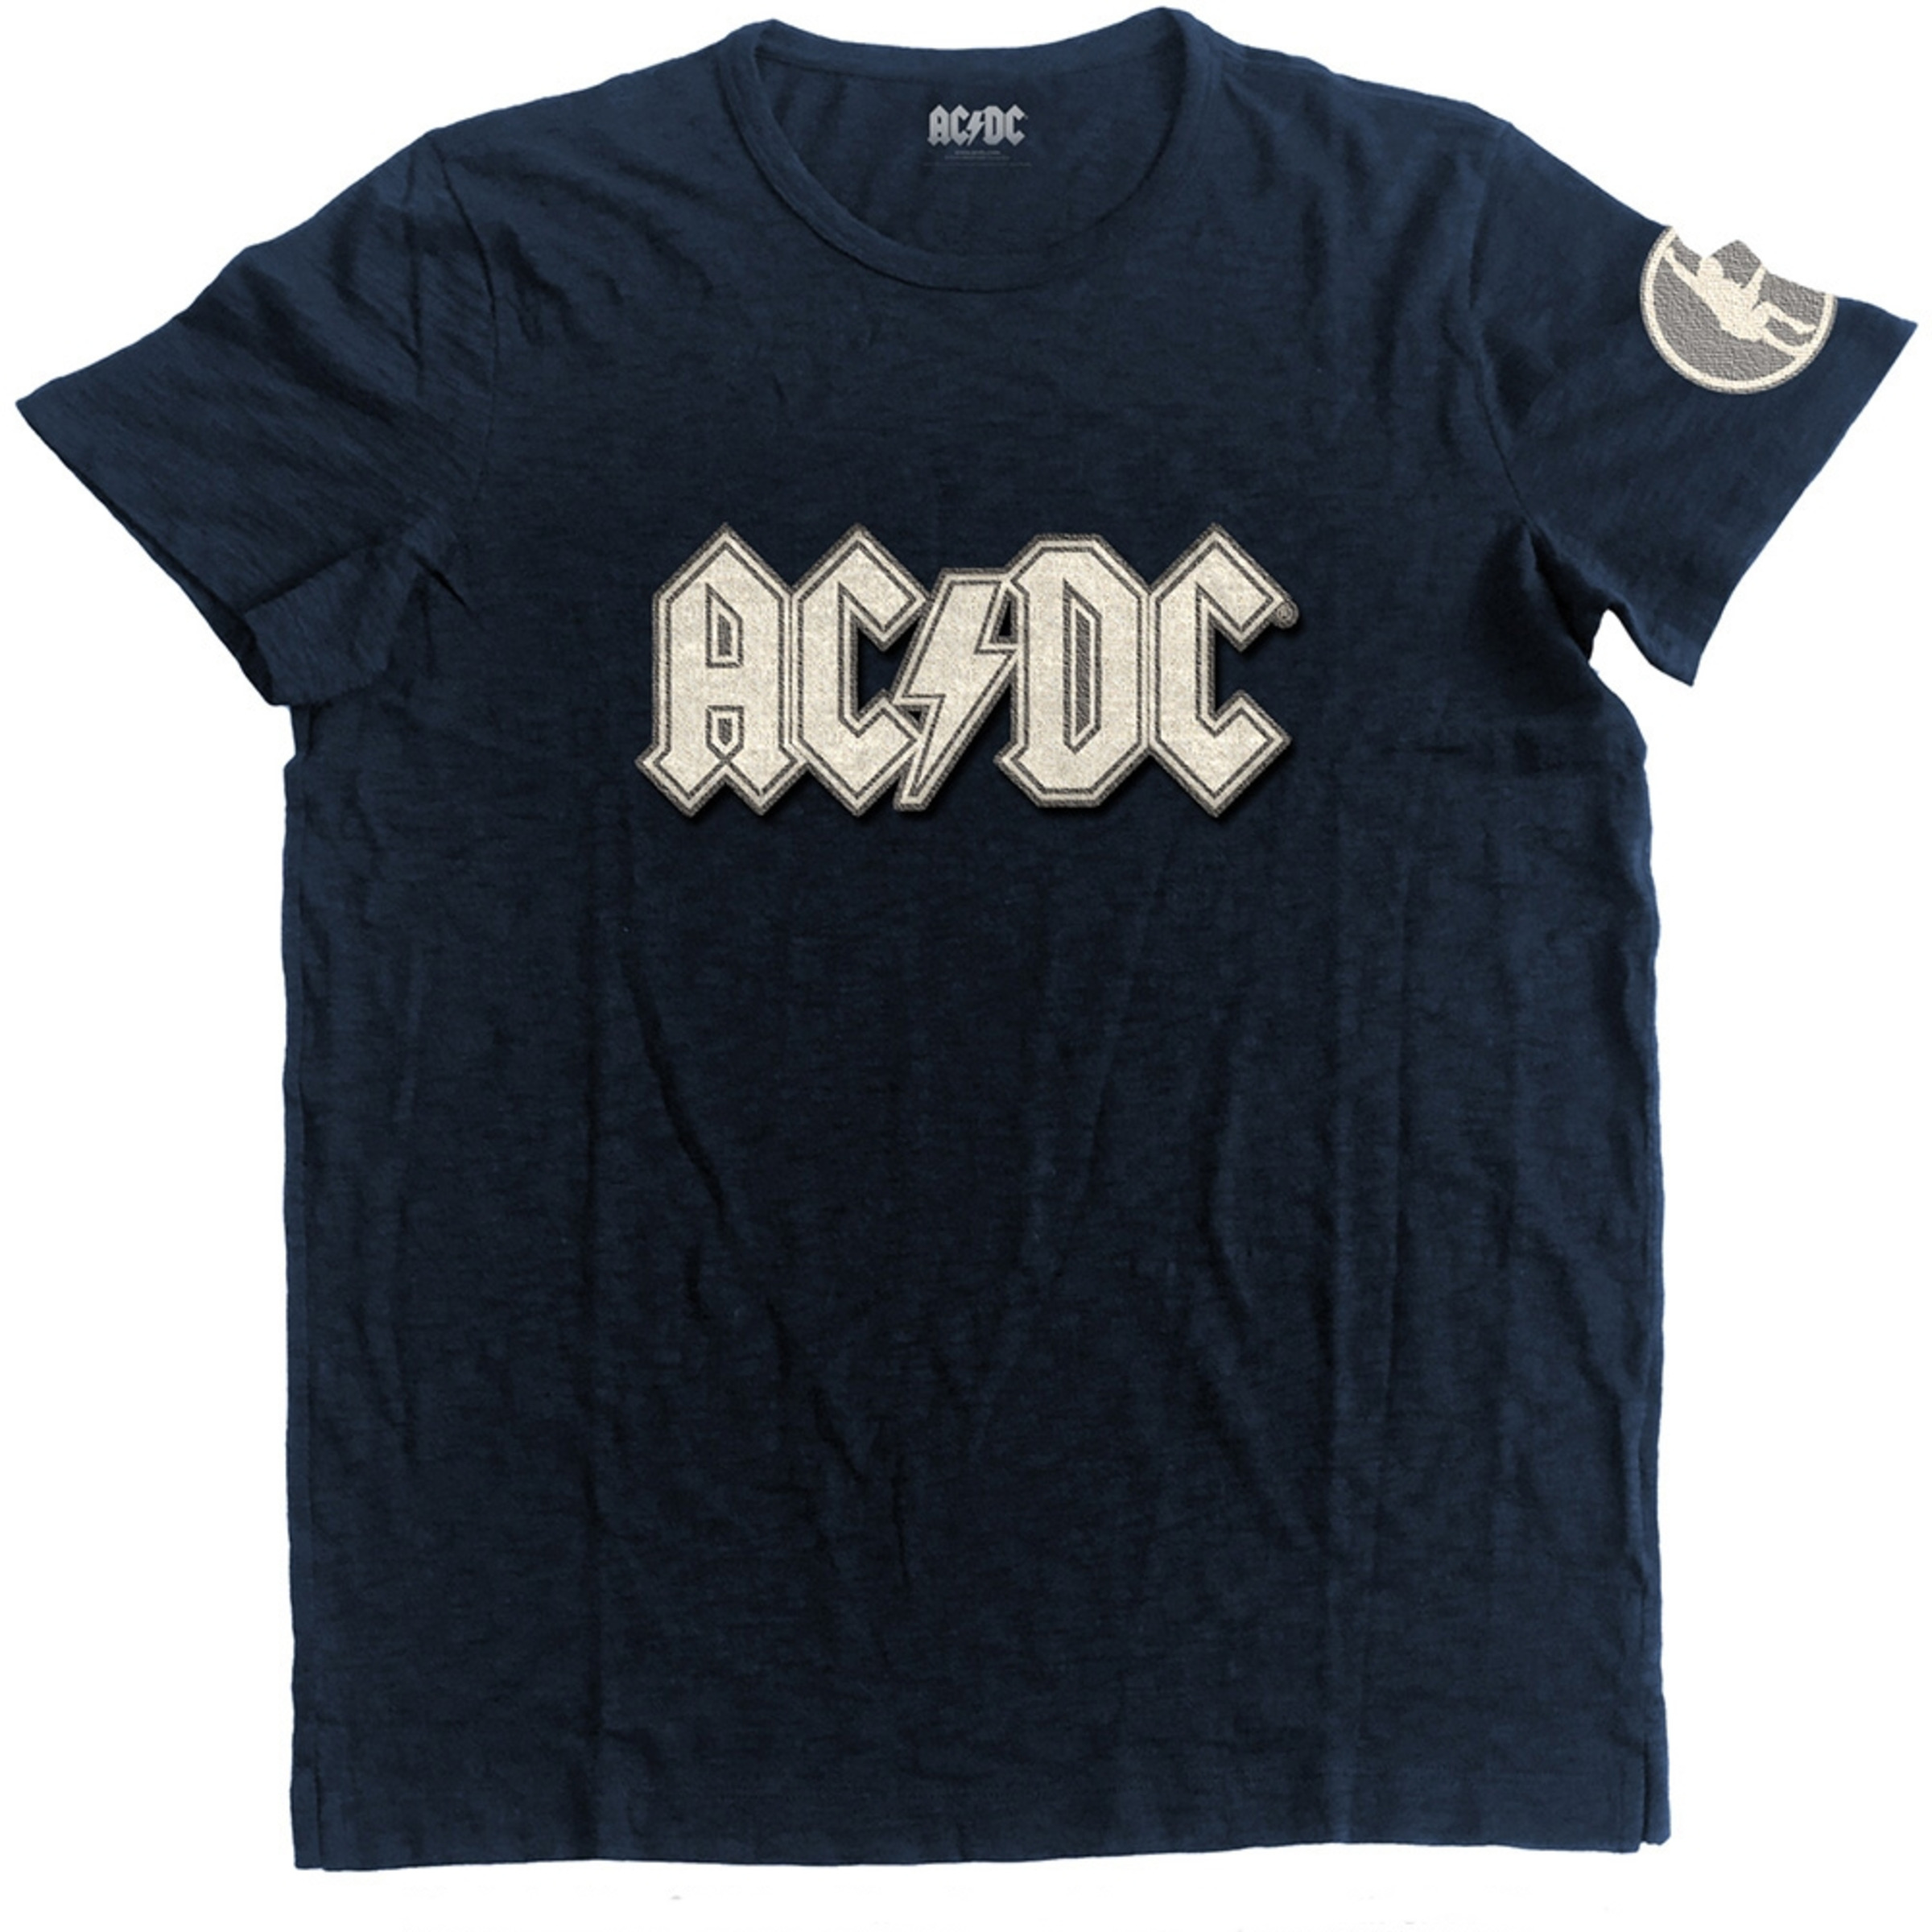 Clothing | Official AC/DC Logo & Angus T-Shirt - GigGear